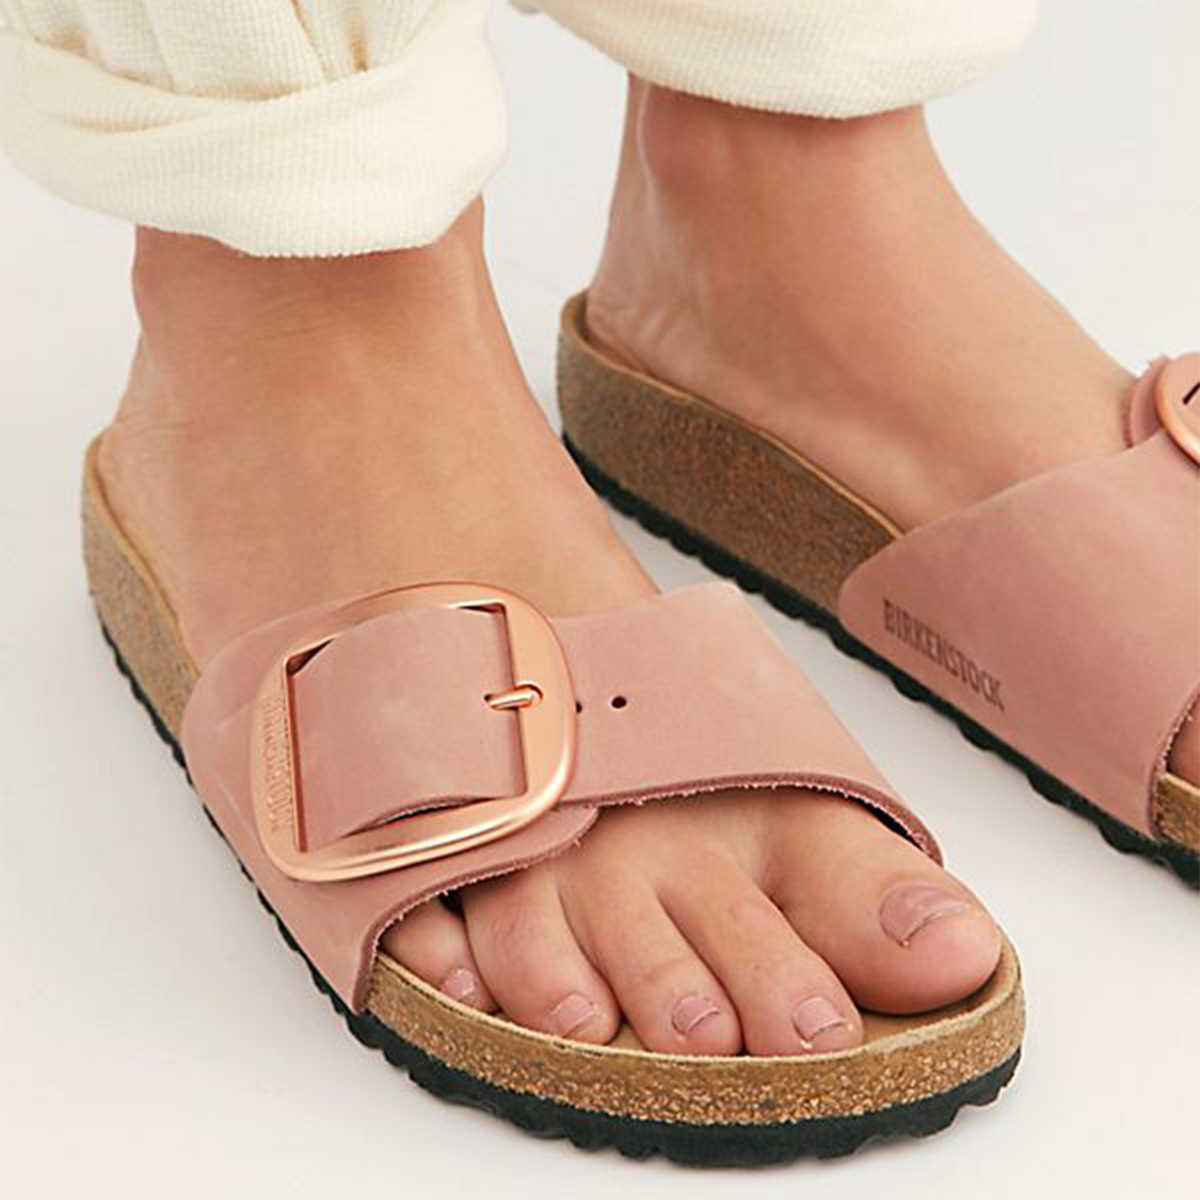 how to clean birkenstocks without kit